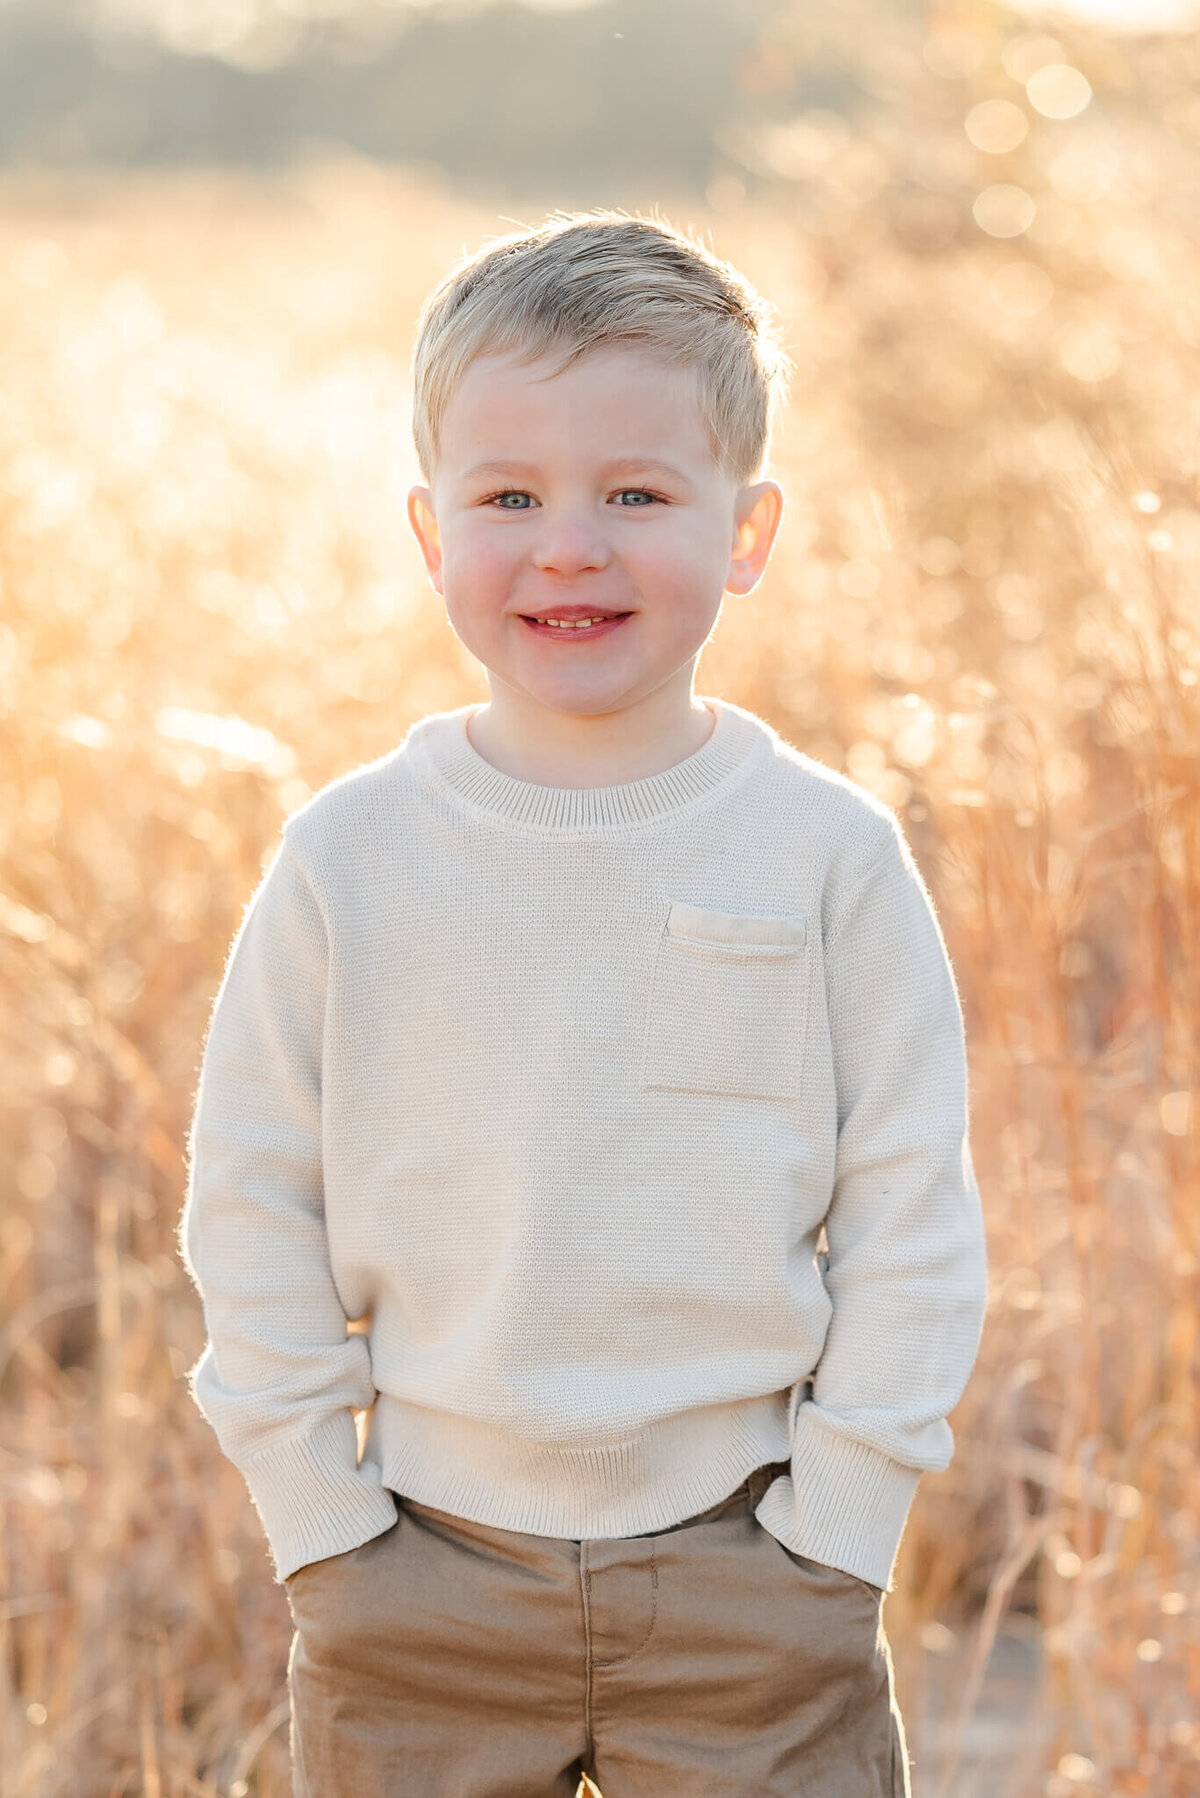 A young boy, wearing khakis and a long sleeve off-white shirt, puts his hands in his pockets and smiles. Photo captured by Justine Renee Photography at Pleasure House Point in Virginia Beach